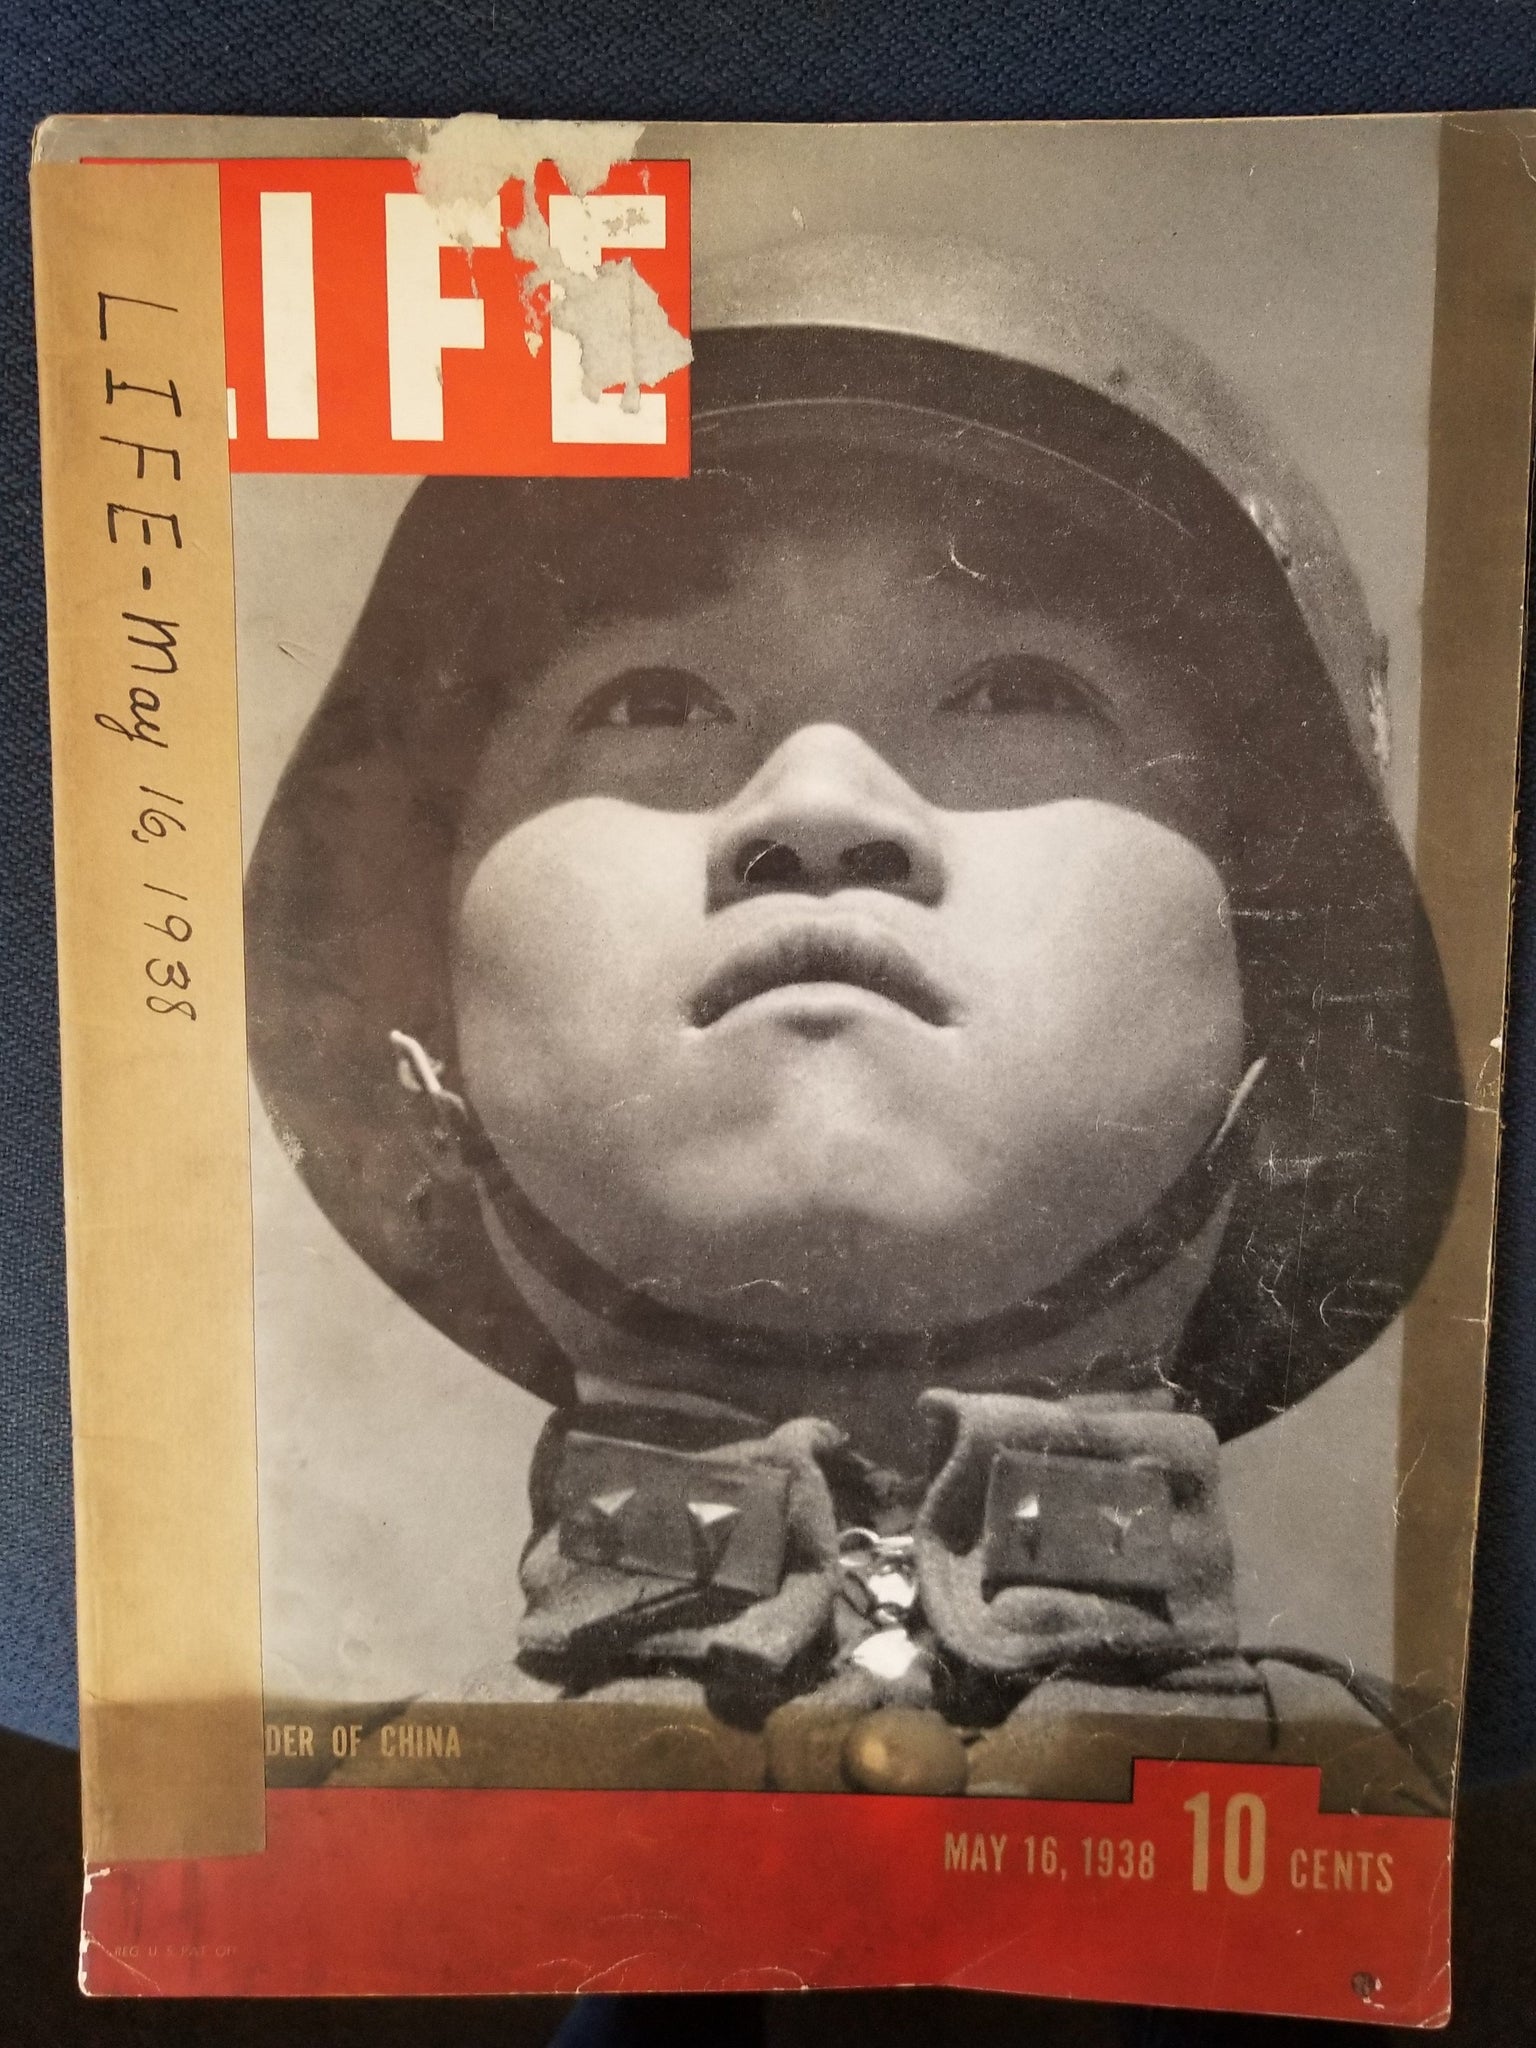 LIFE MAGAZINE MAY 16, 1938 "A Defender of China"  by Henry R. Luce, Ed.